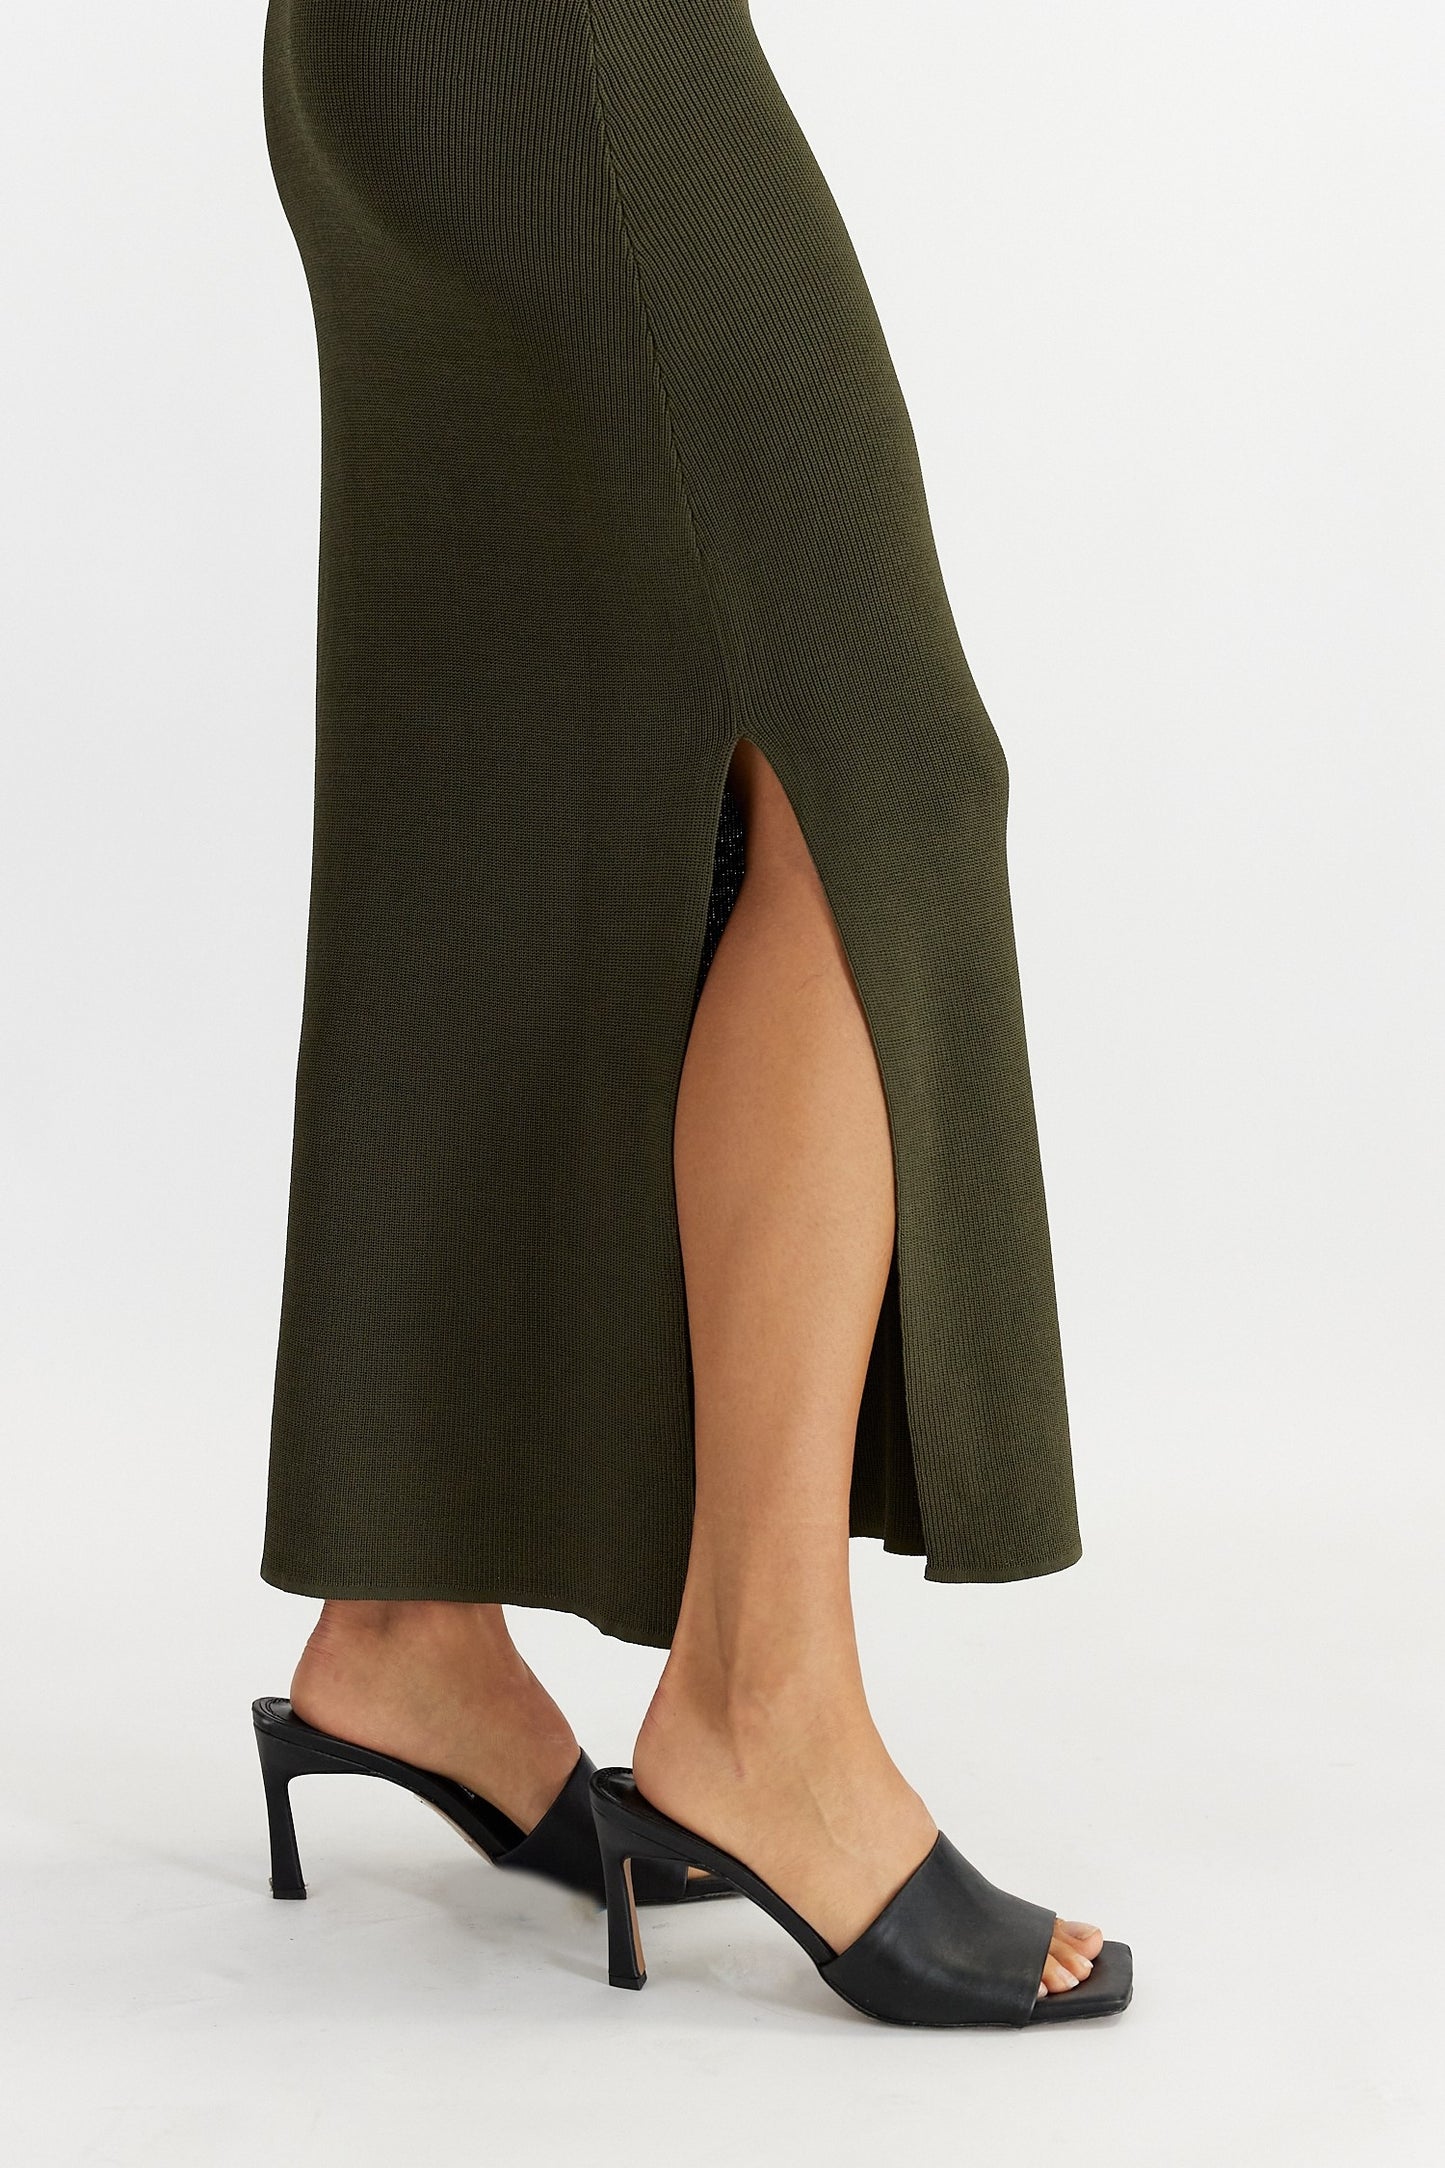 All : Row, The Francine Dress in Olive - Boutique Dandelion